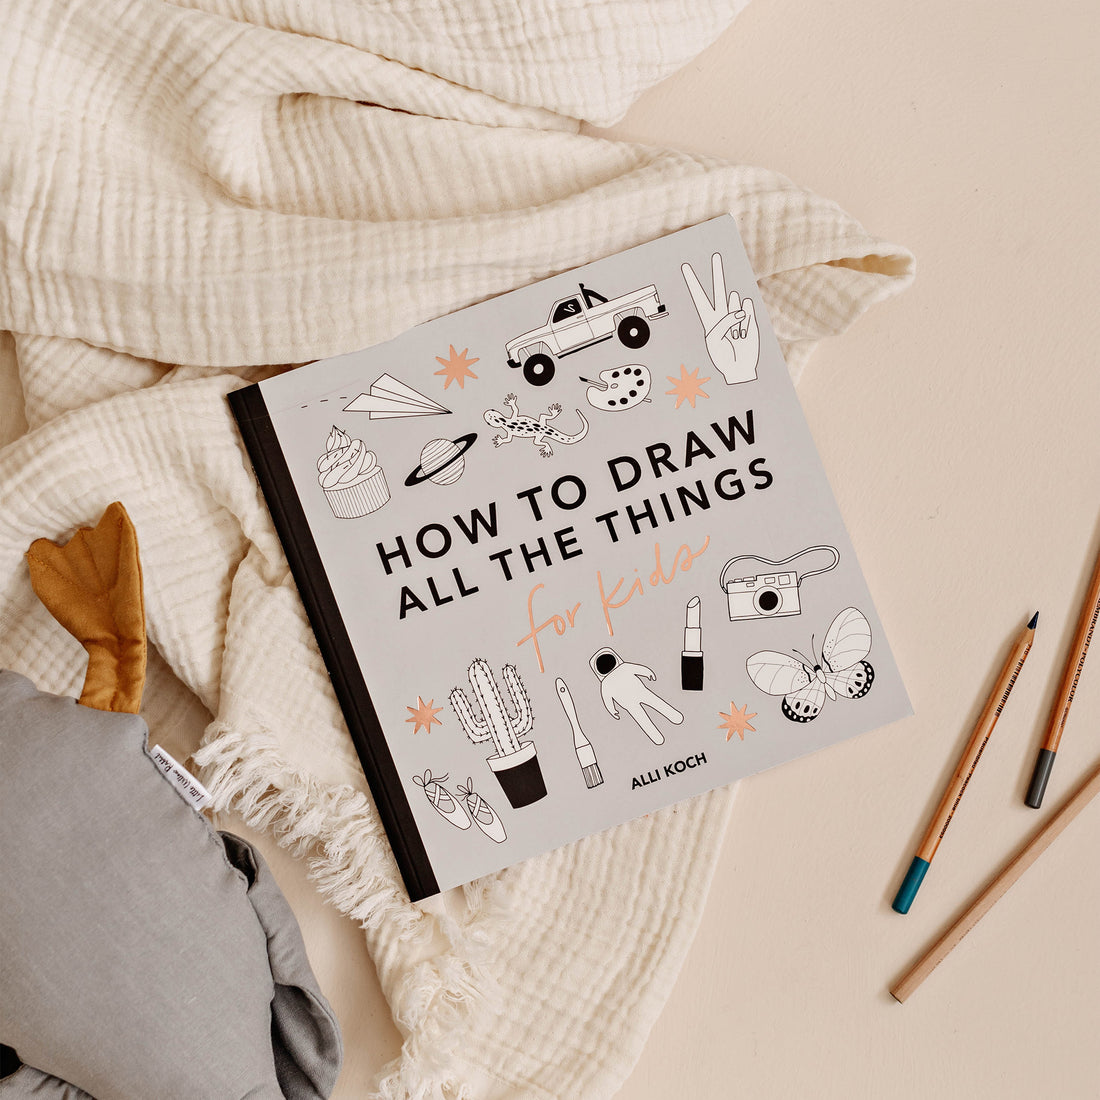 The How to Draw Book for Kids [Book]